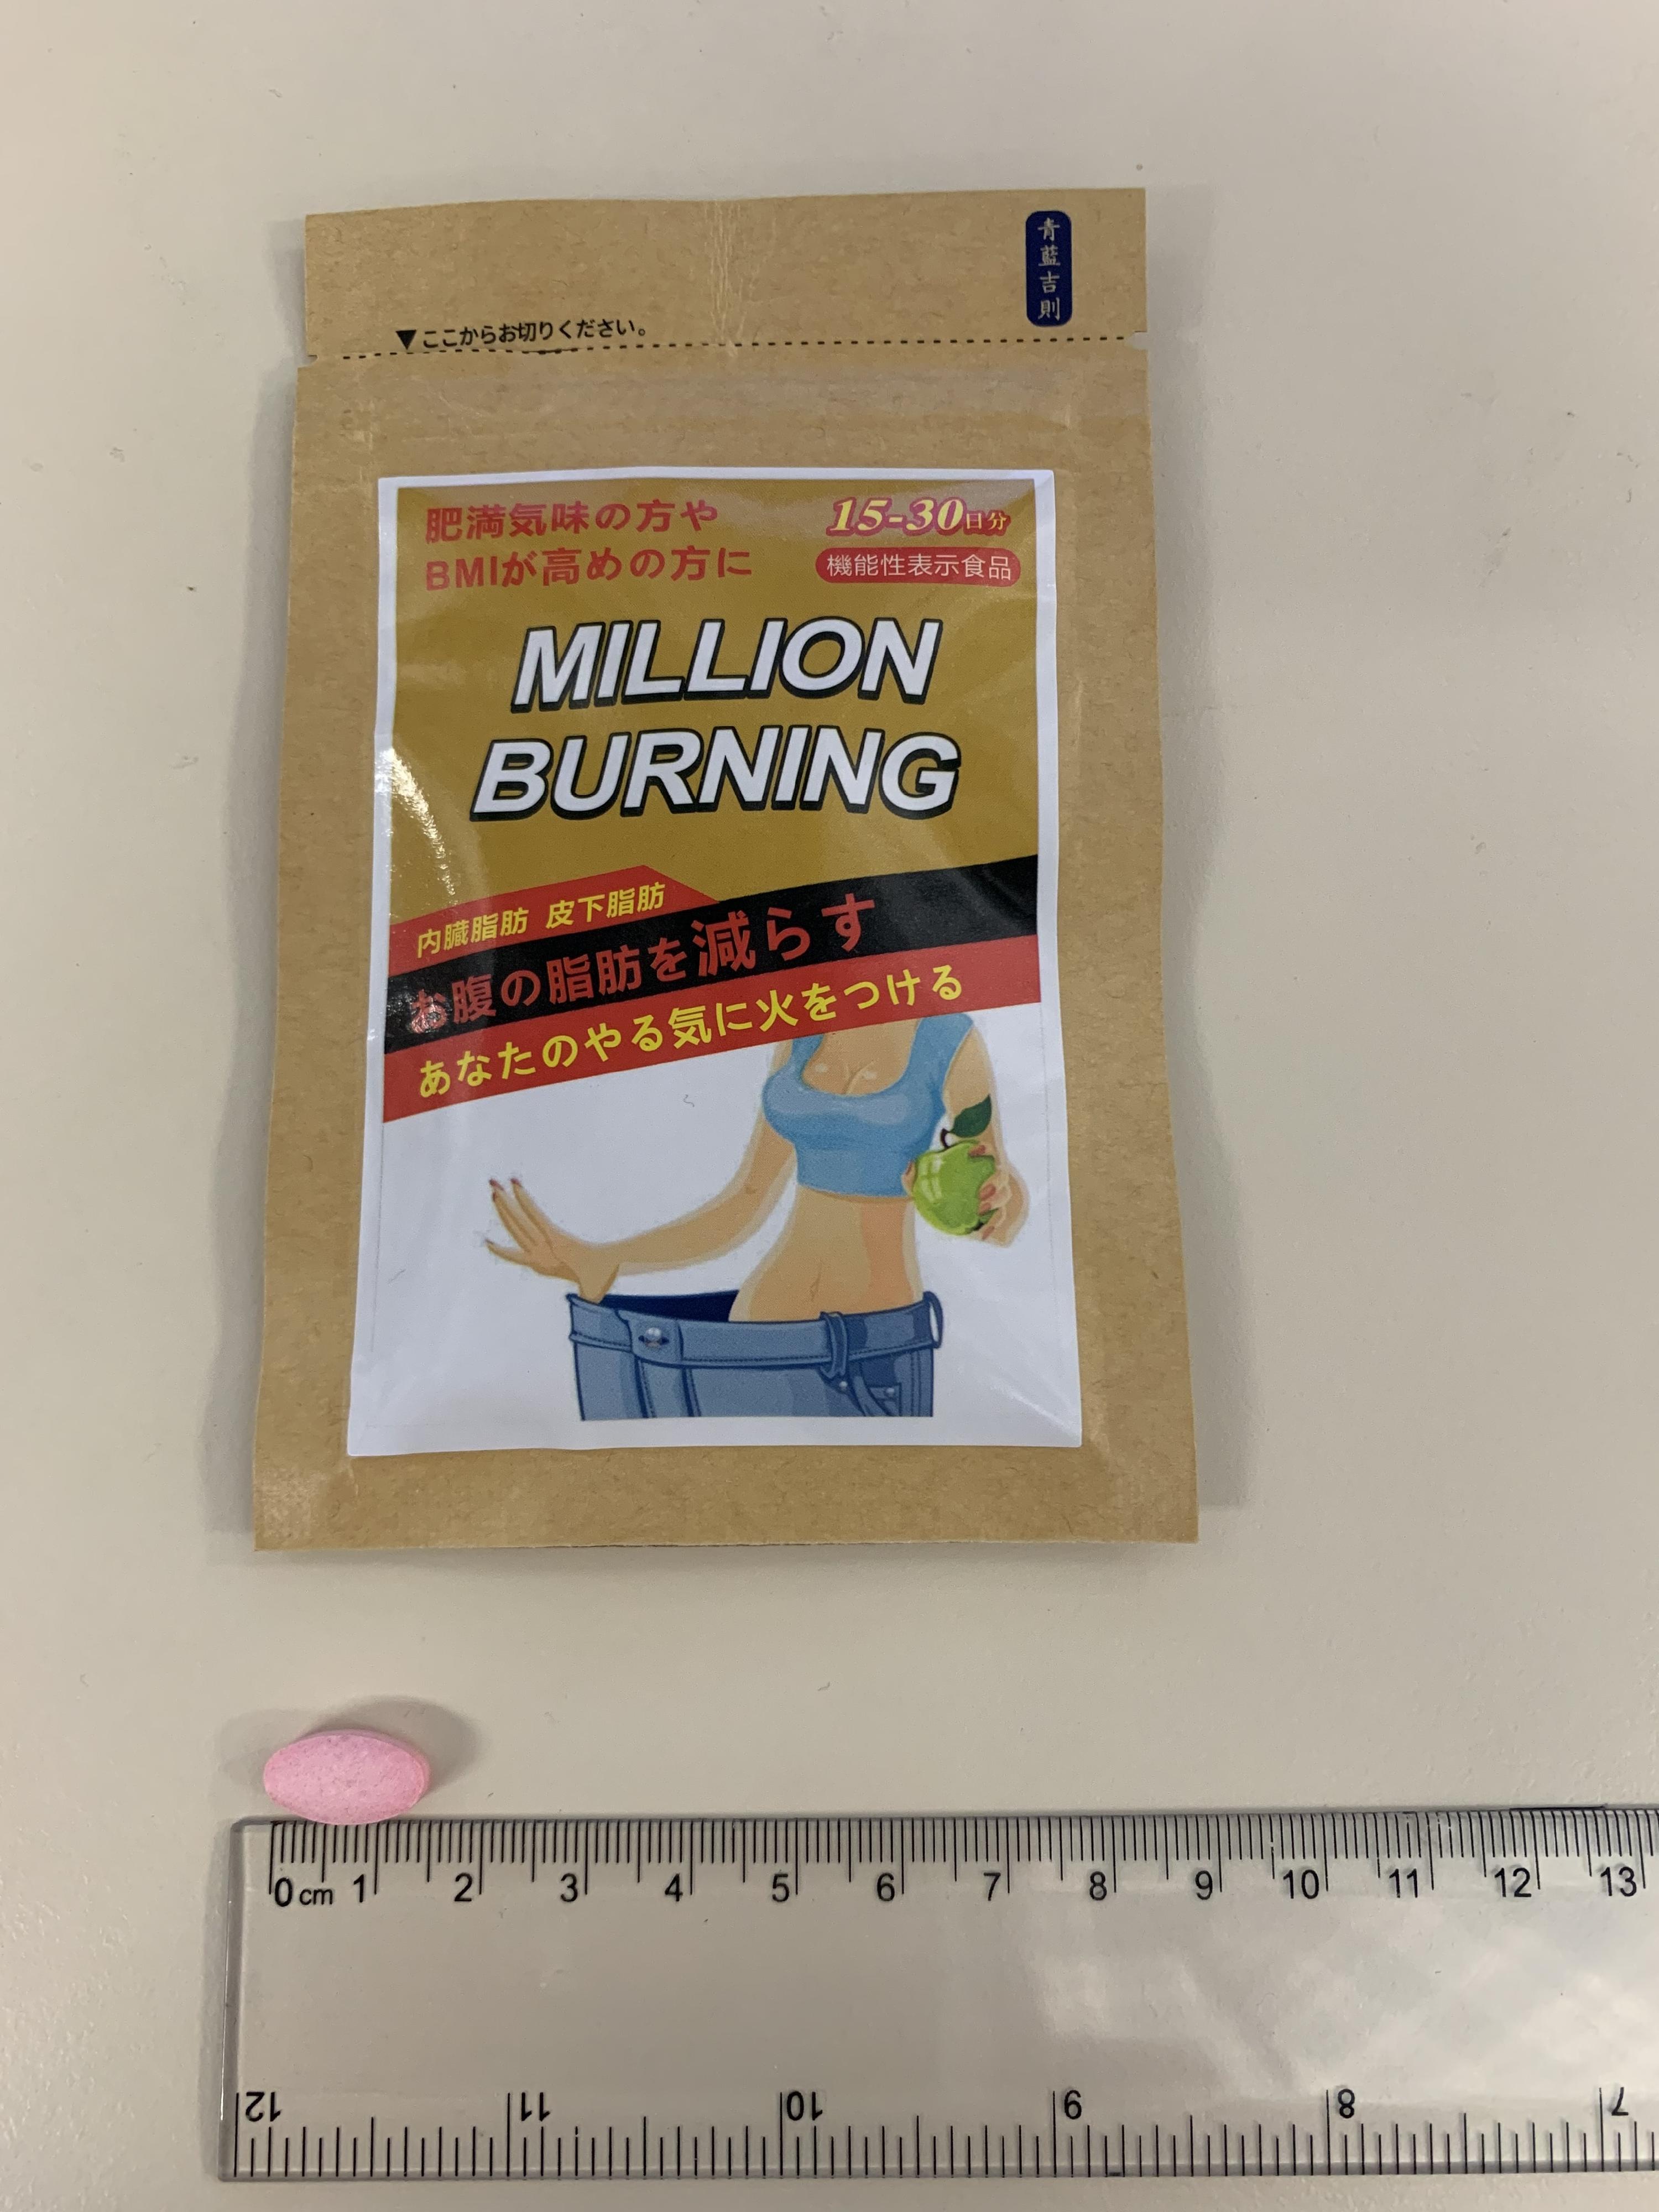 The Department of Health today (February 25) appealed to the public not to buy or consume two slimming products, namely Million Burning and the other with a Japanese name, as they were found to contain undeclared controlled drug ingredients. Photo shows the product, Million Burning, that contains sibutramine.